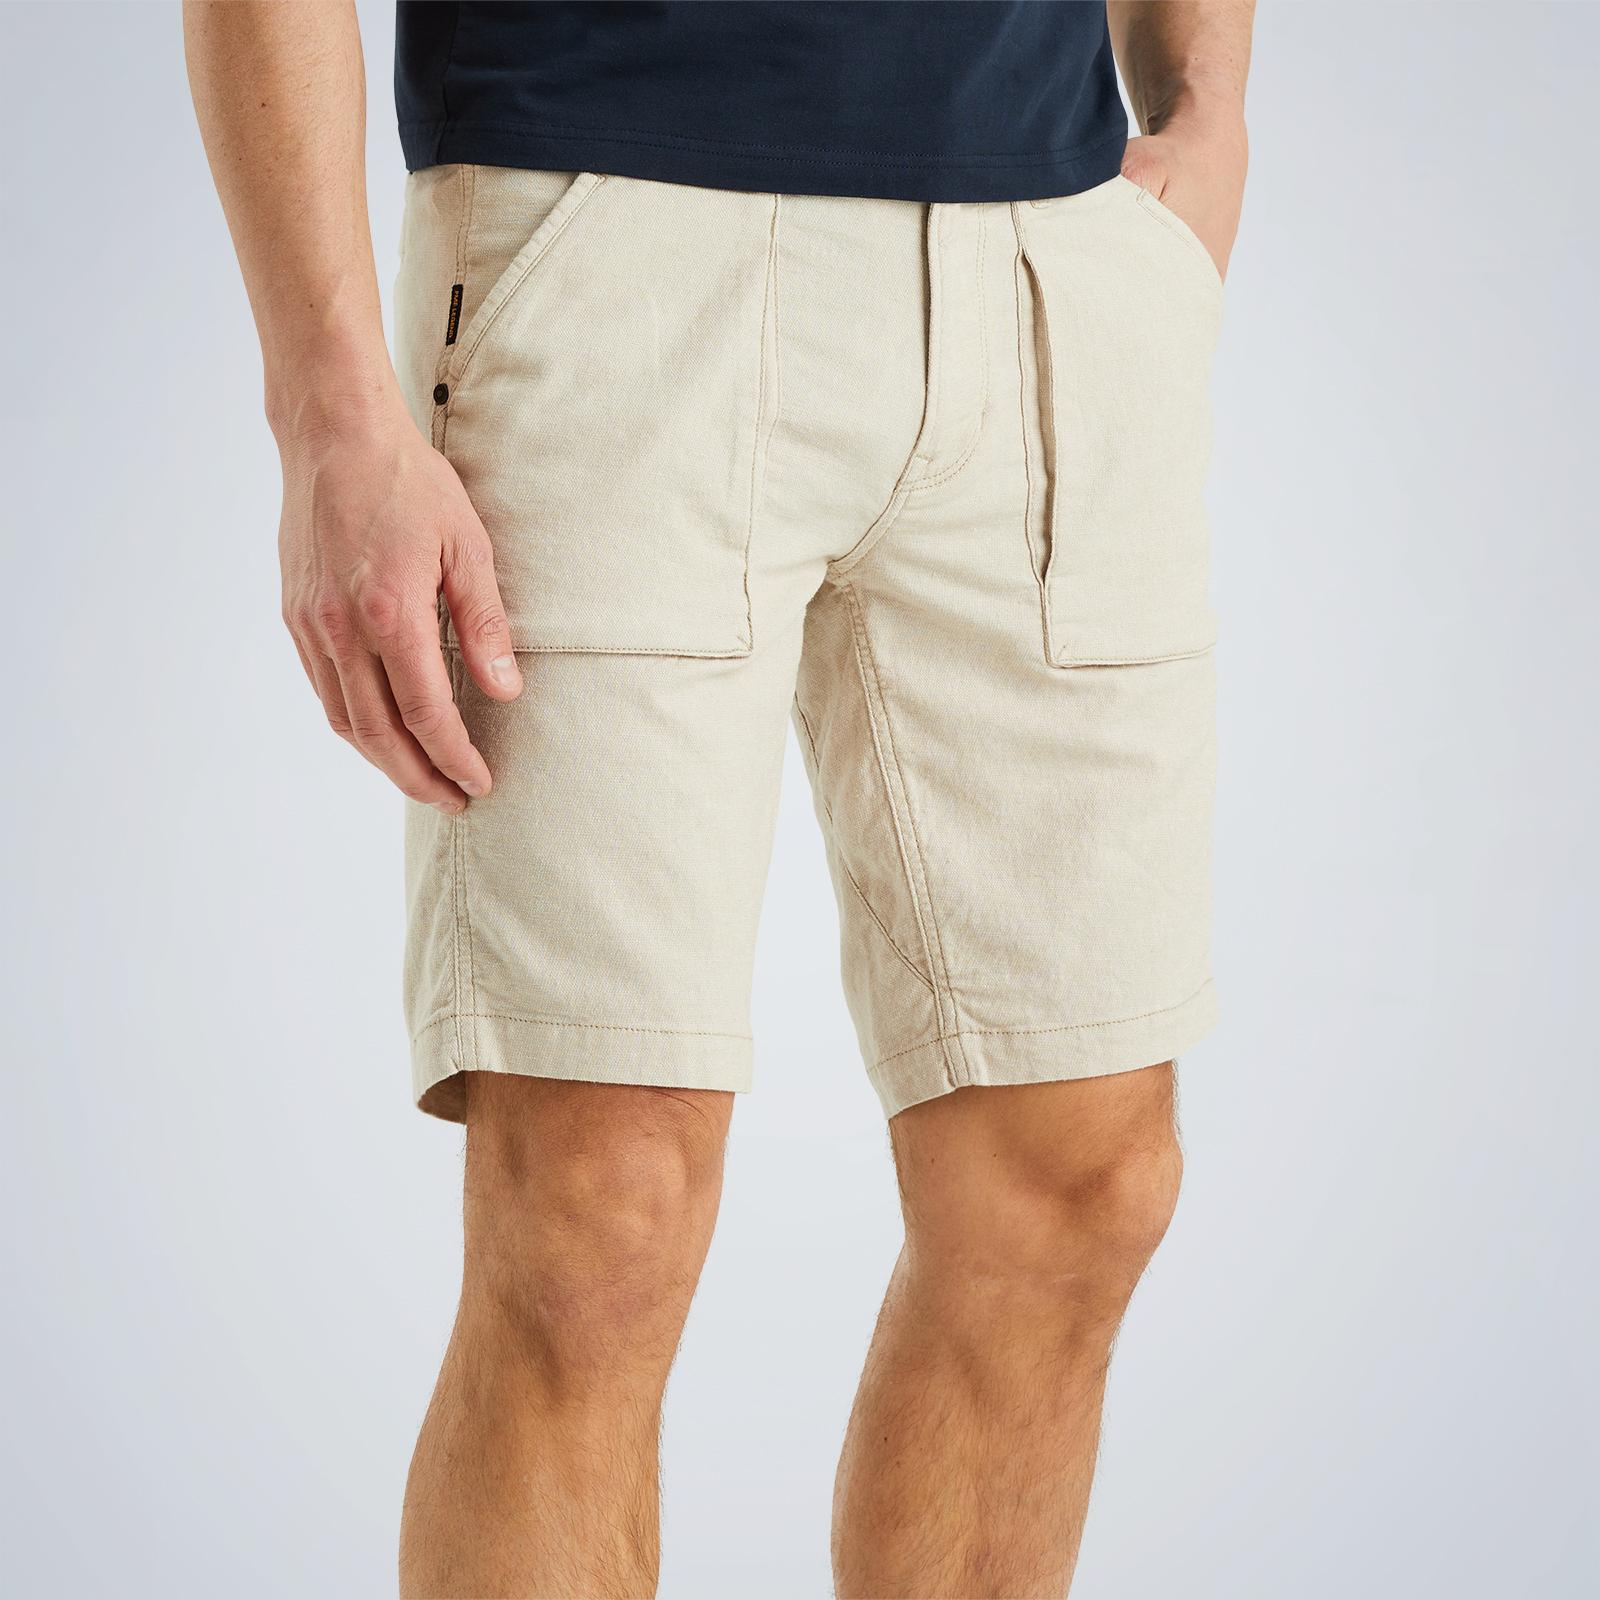 PME Legend Liftmaster Worker shorts